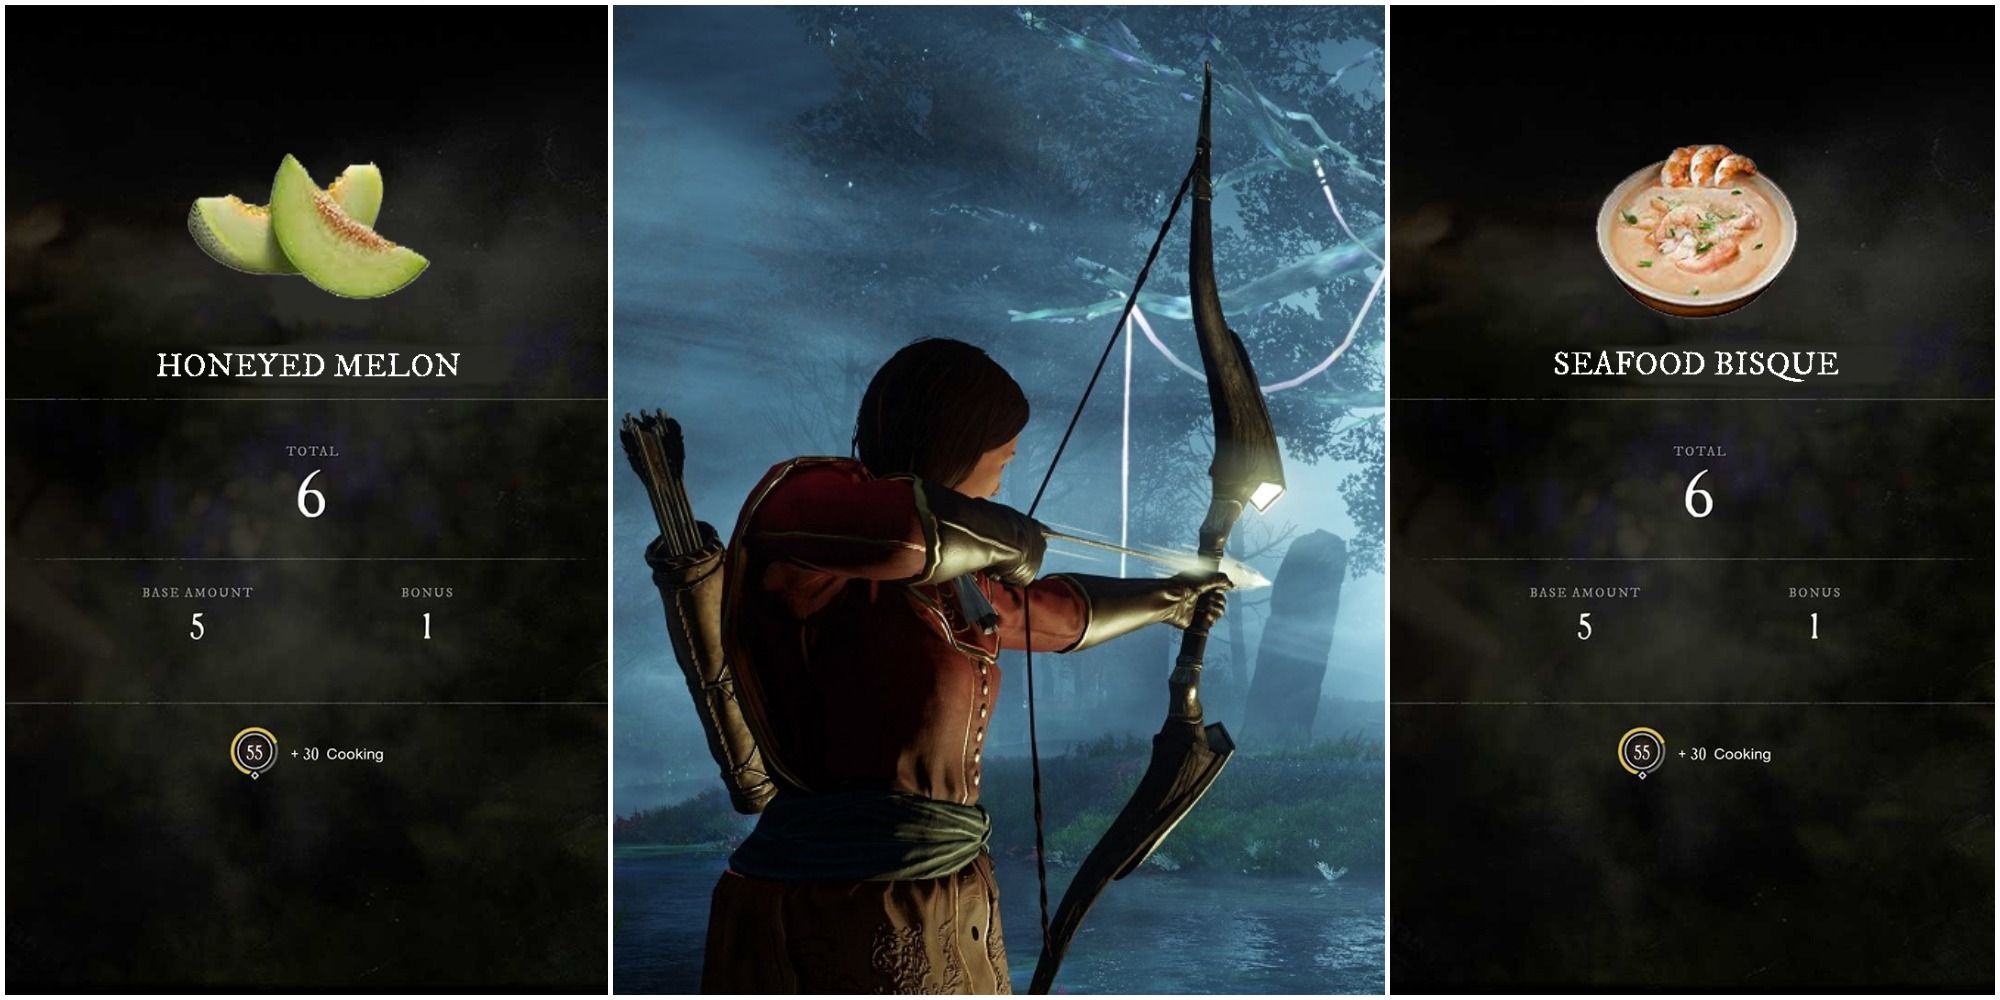 A split image of Honeyed Melon recipe, a female player wielding a bow in a bluish glowing glade, and a Seafood Bisque recipe, from left to right